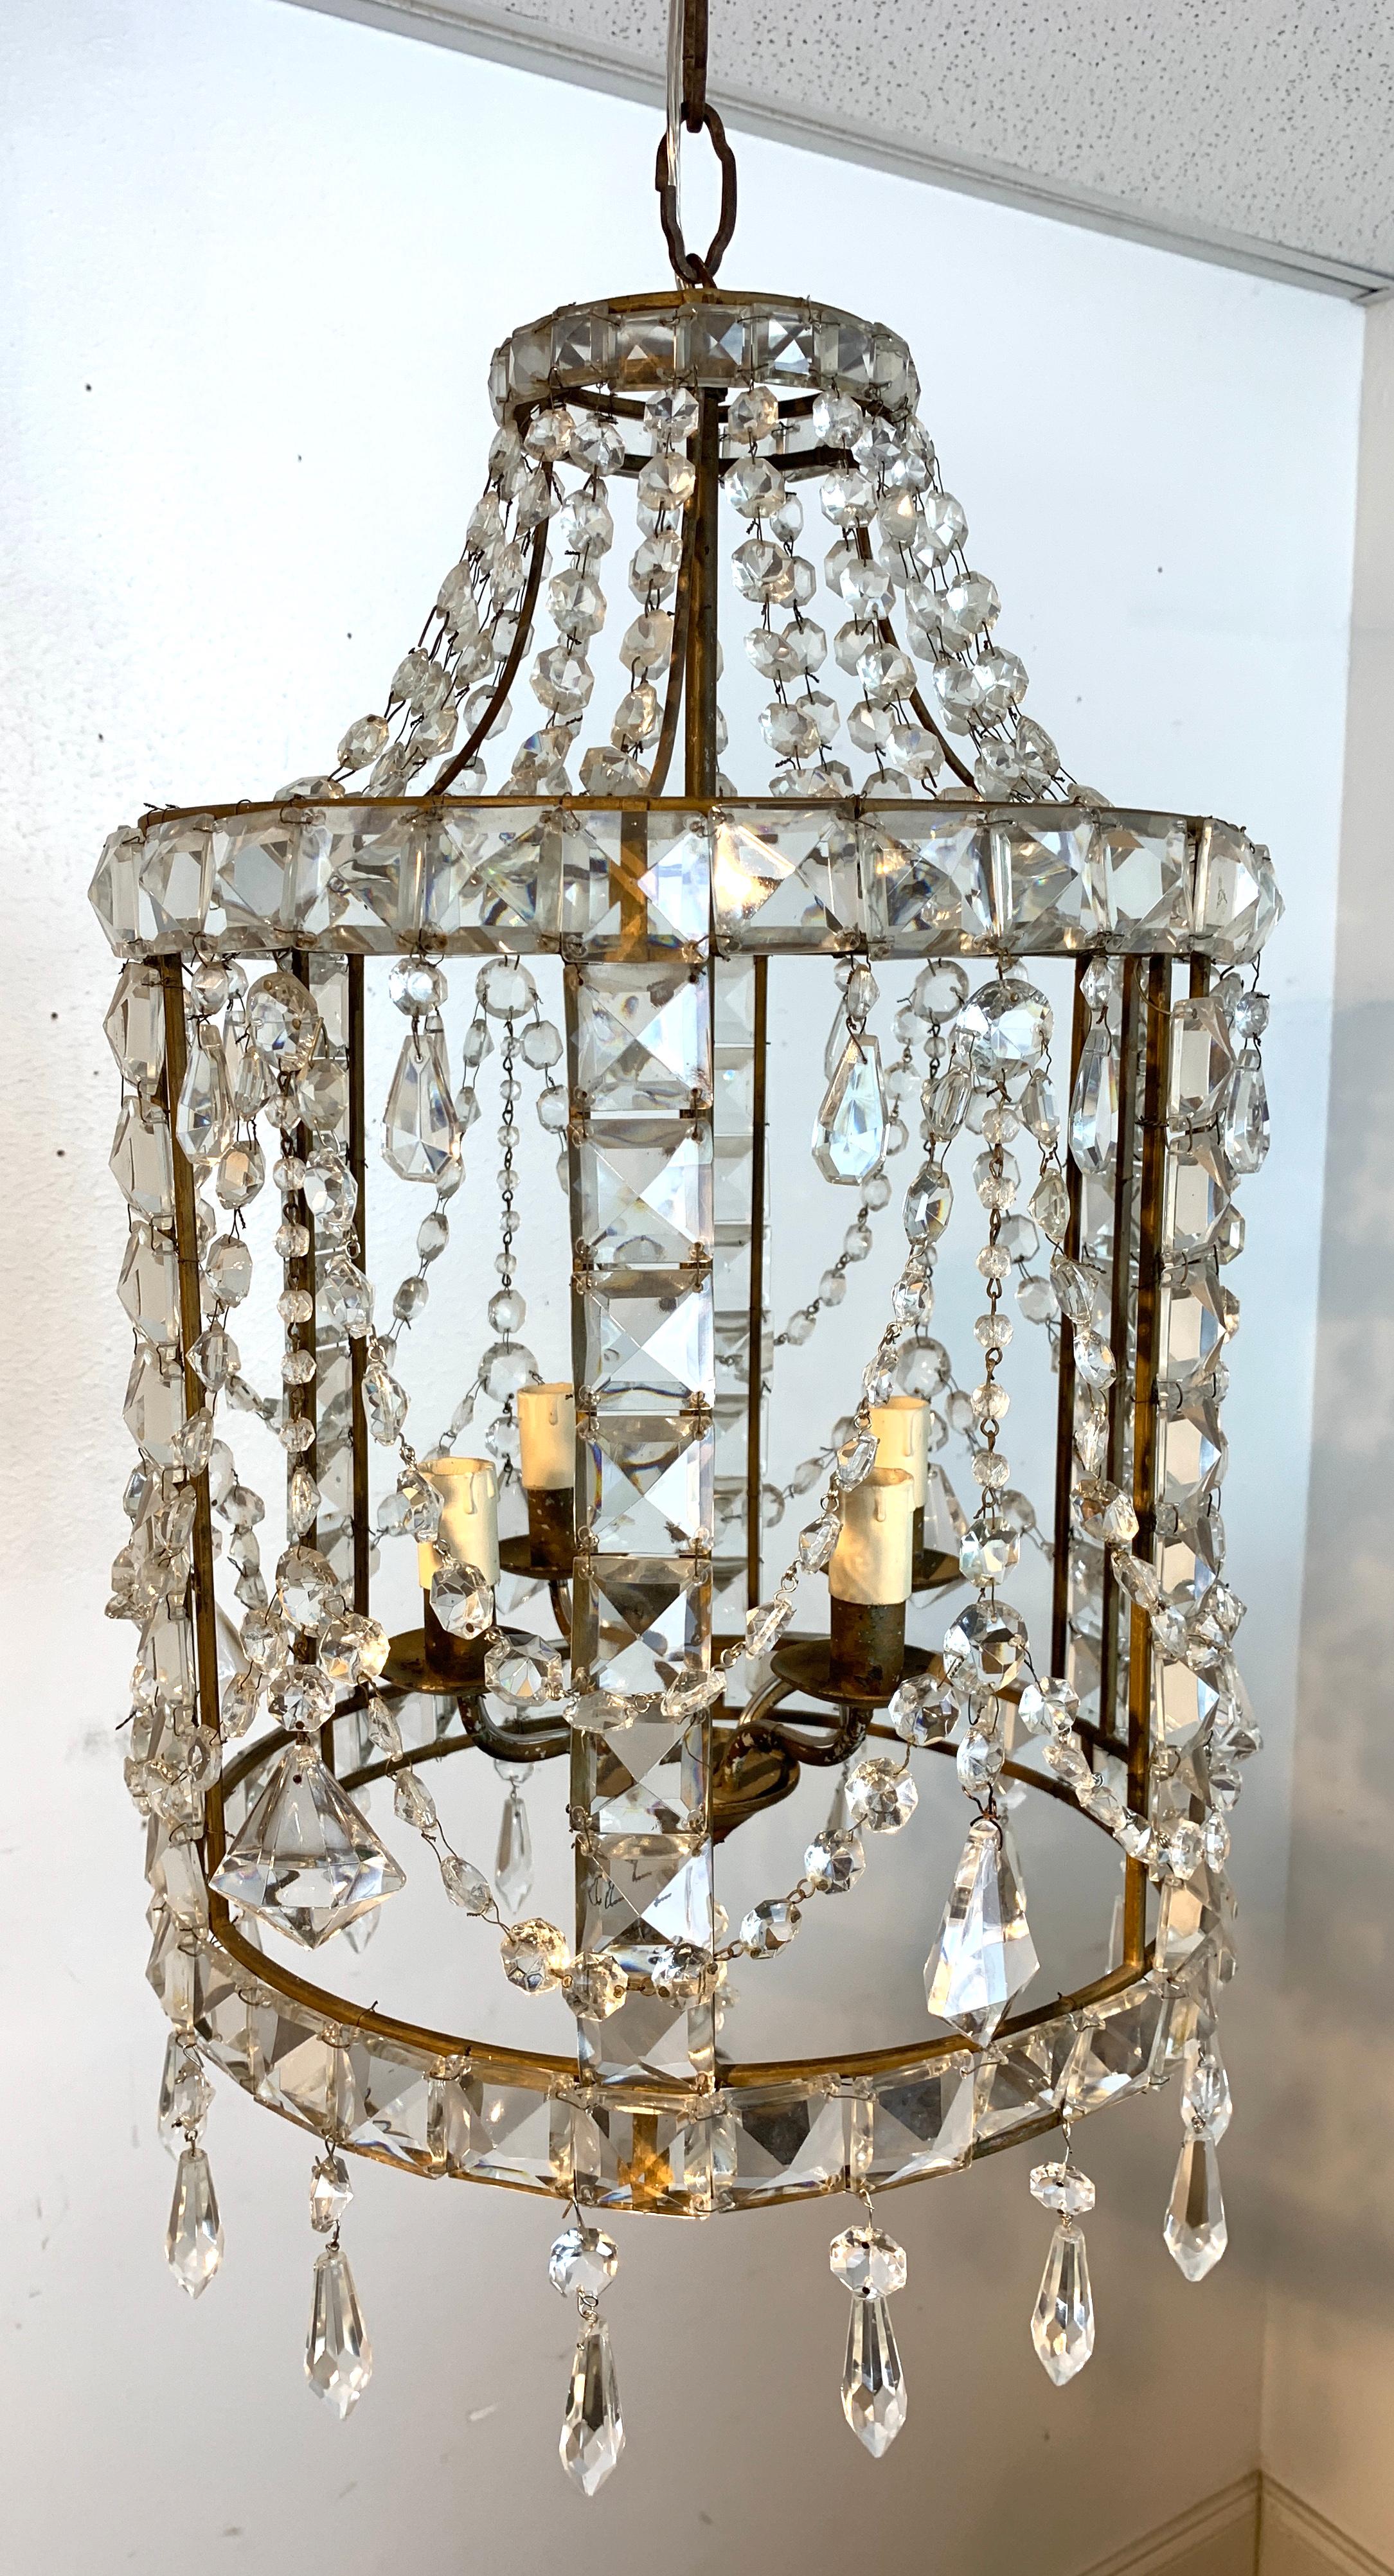 French neoclassical crystal lantern, with draps and swags of crystal, fitted with four candelabra bulbs, complete with 12